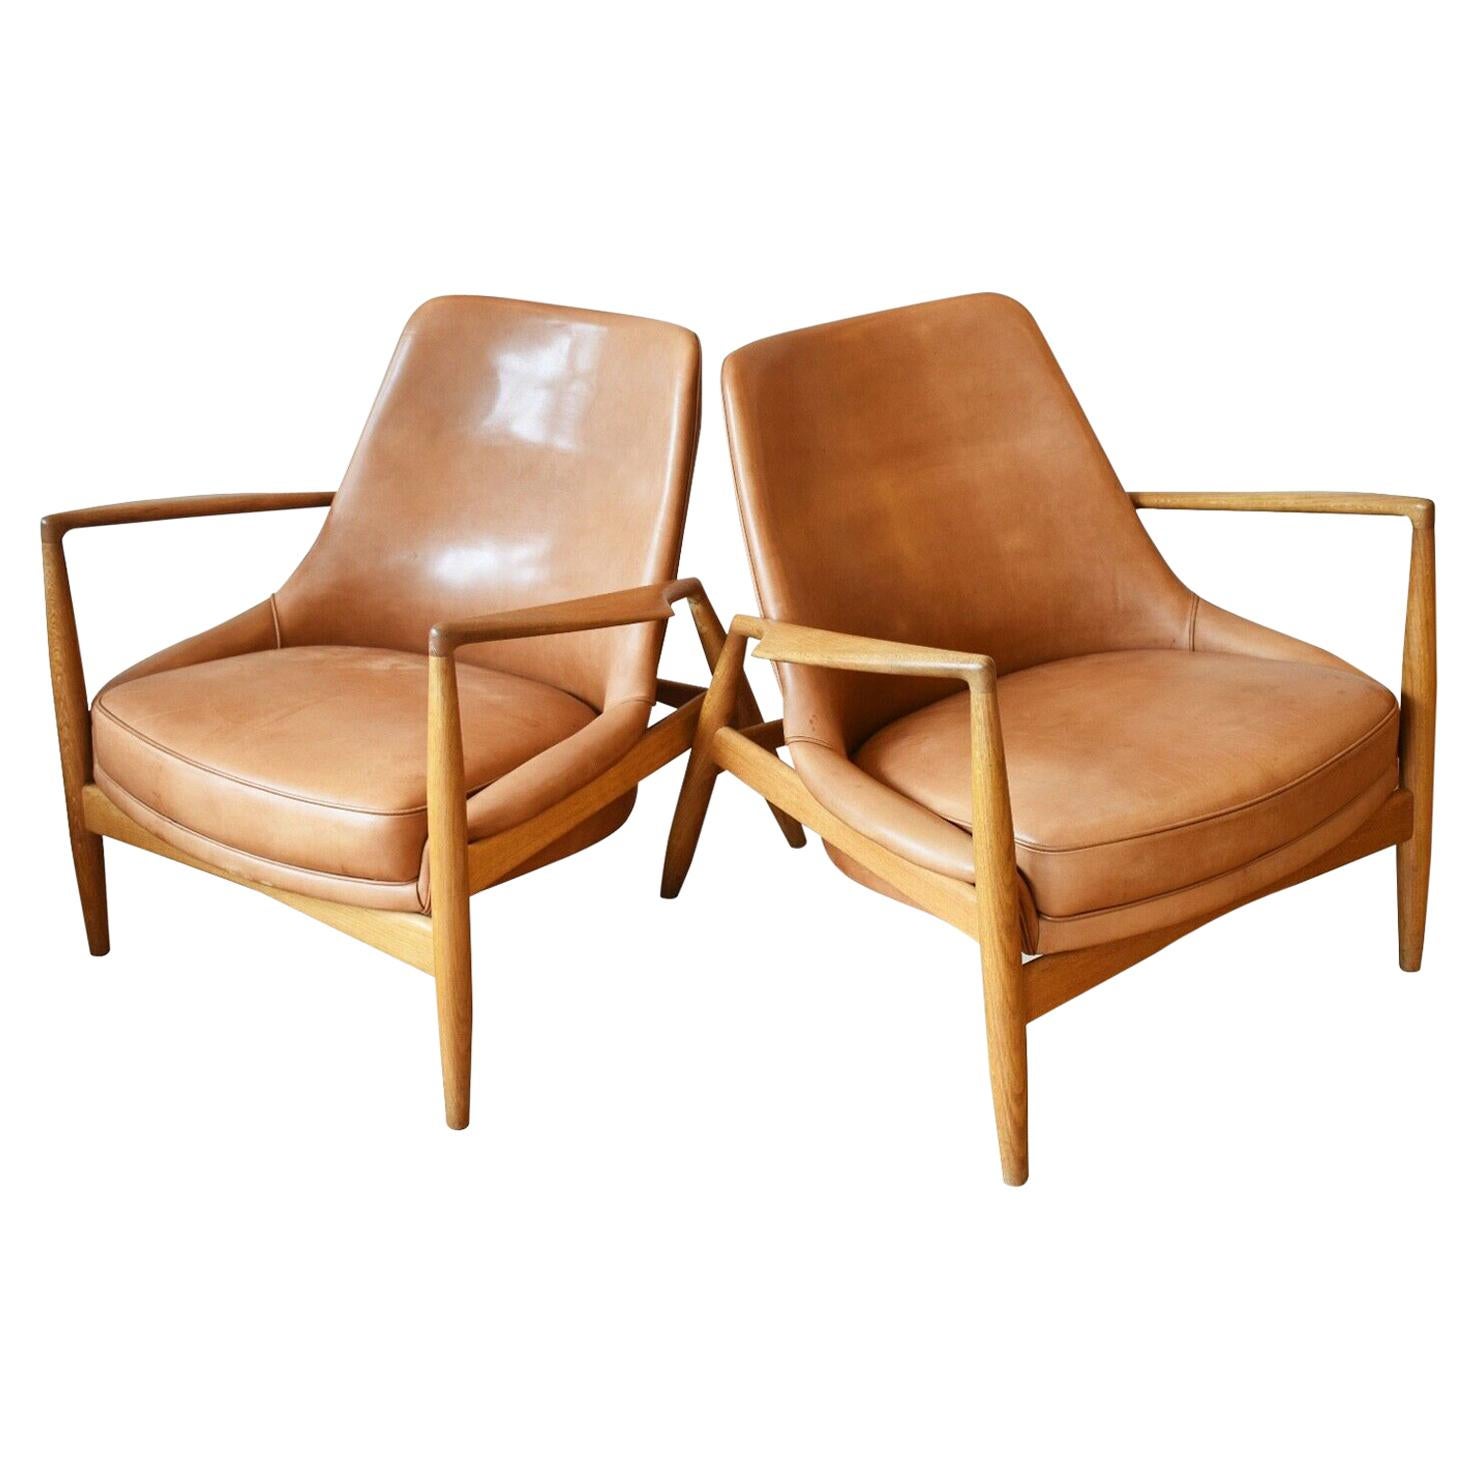 Pair of ‘Seal’ Lounge Chairs Produced by Ib Kofod-Larsen for Brdr Petersens